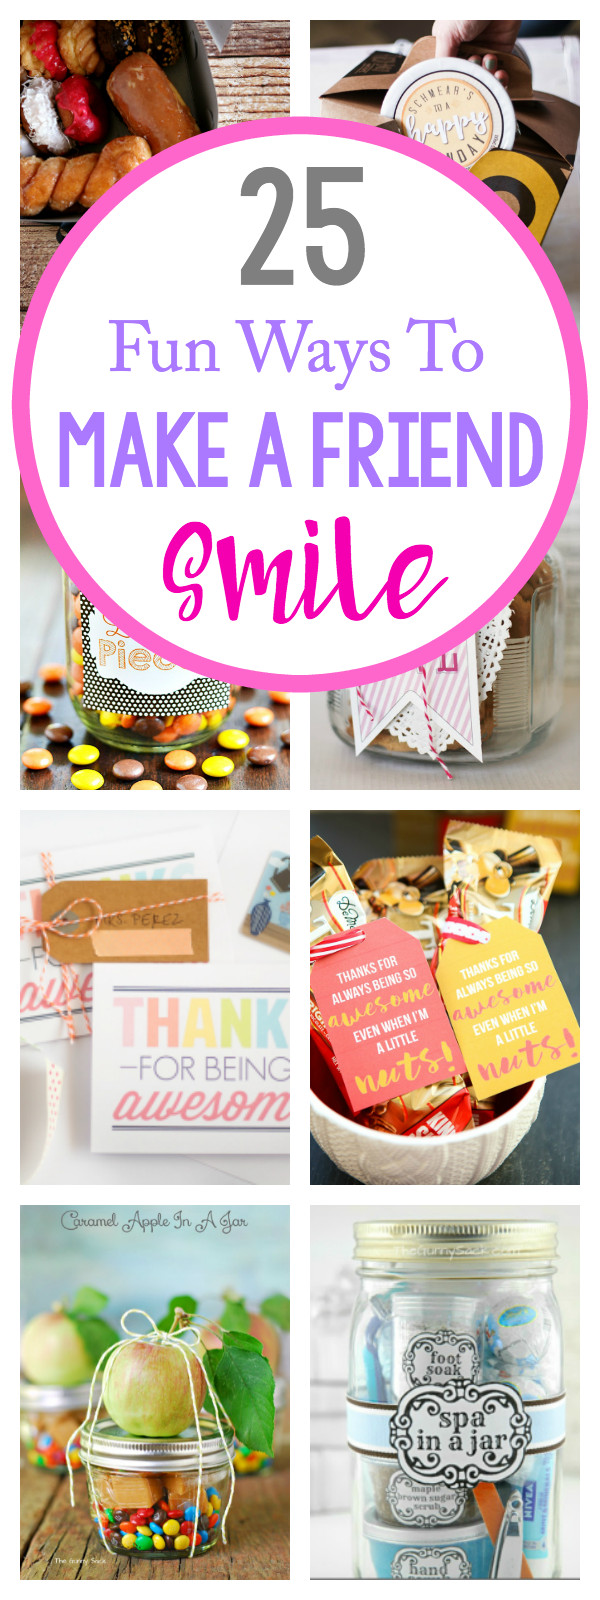 DIY Gifts Ideas For Friends
 Cute Gifts for Friends for Any Occasion – Fun Squared